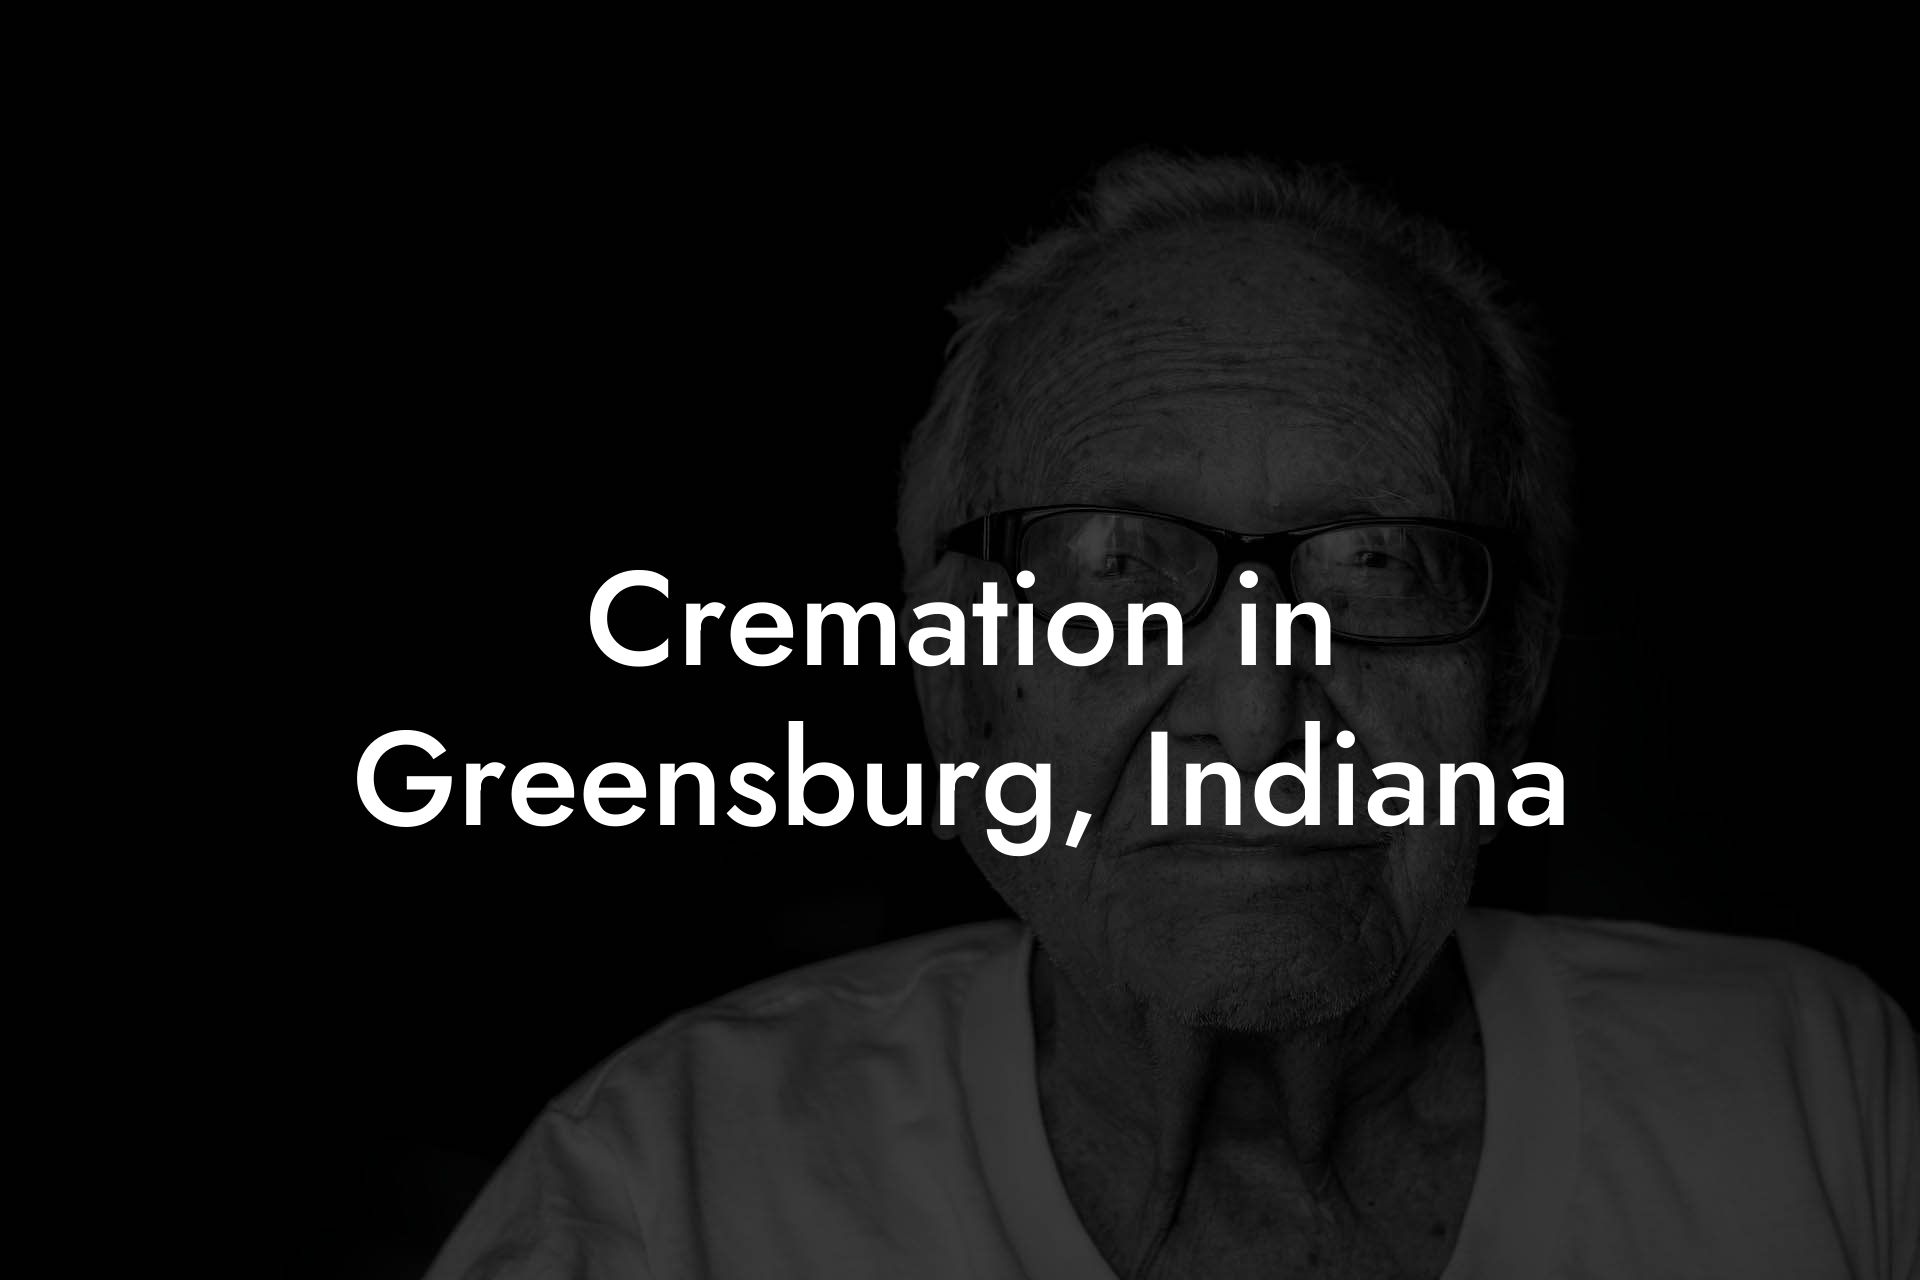 Cremation in Greensburg, Indiana